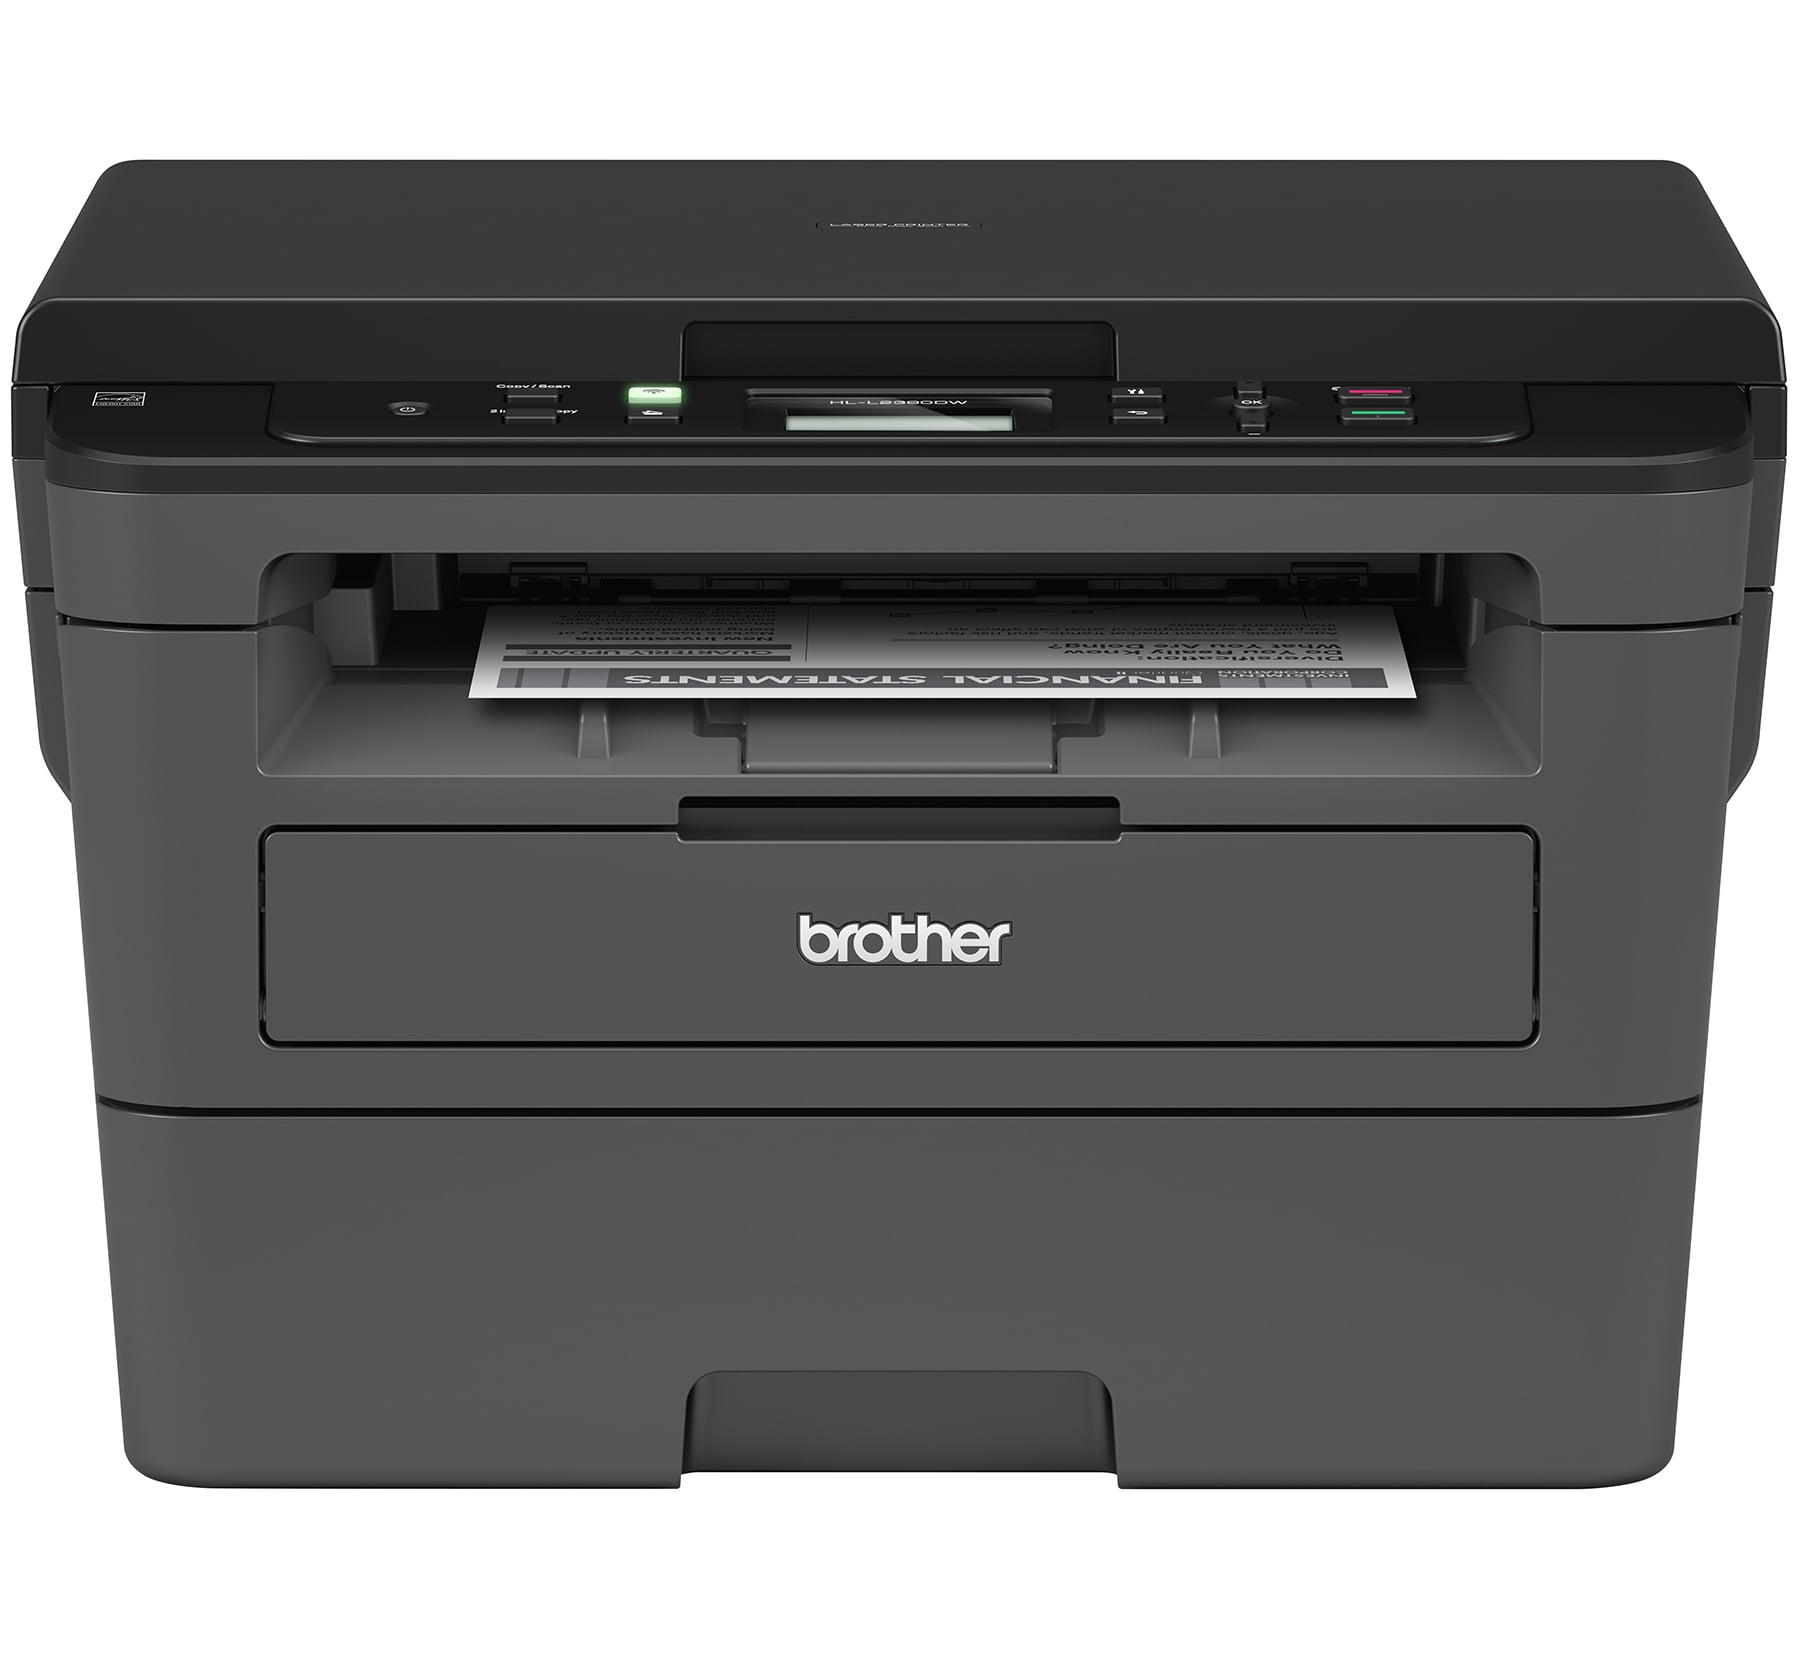 Brother Compact Monochrome Laser Printer, HL-L2390DW, Convenient Flatbed Copy & Scan, Wireless Printing, Duplex Two-Sided Printing